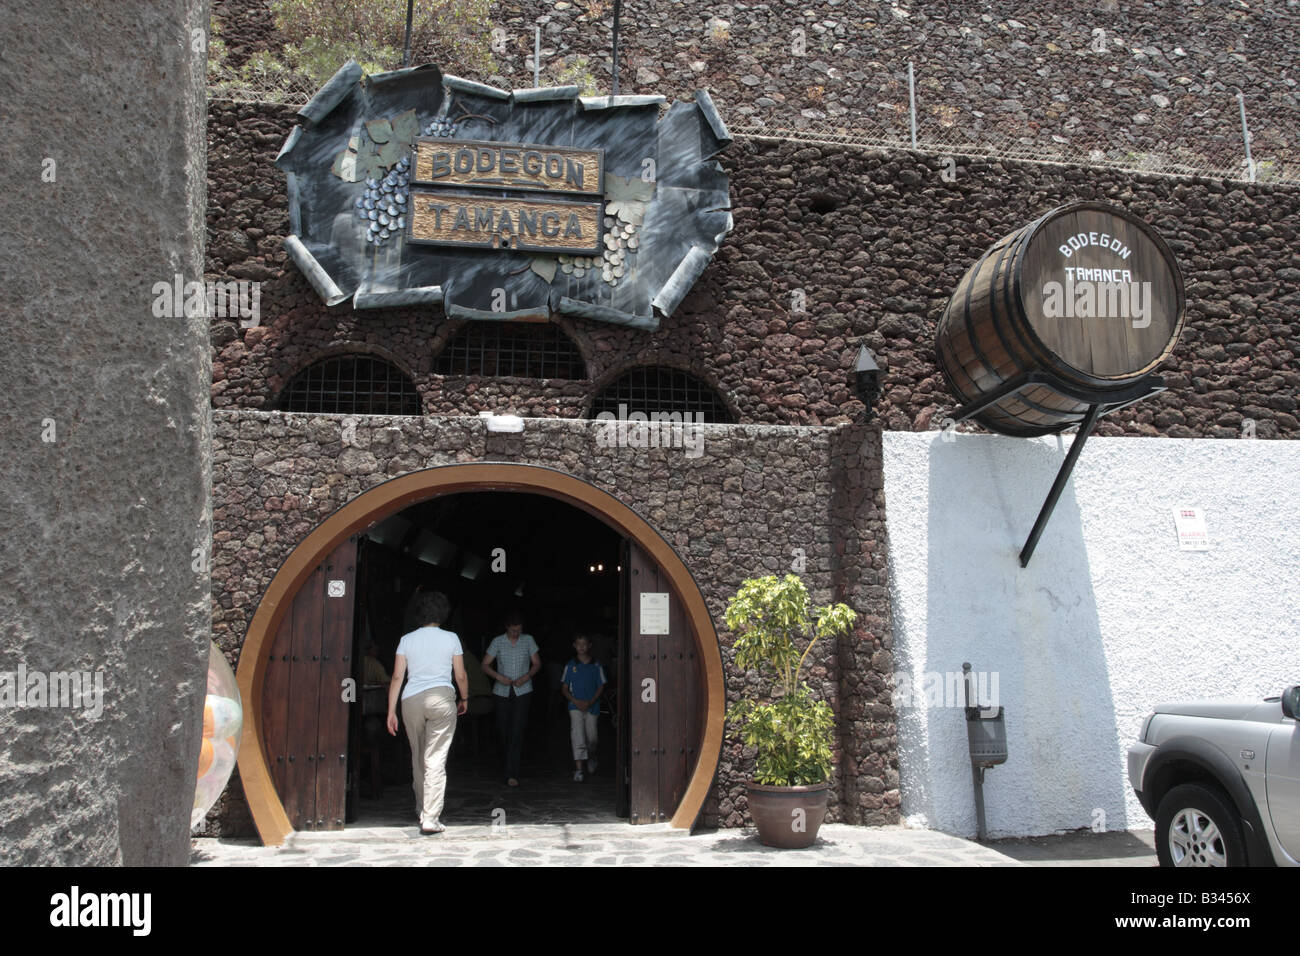 The entrance of the Bodegon Tamanca a restaurant attached to a bodega wine cellar built into caves Stock Photo